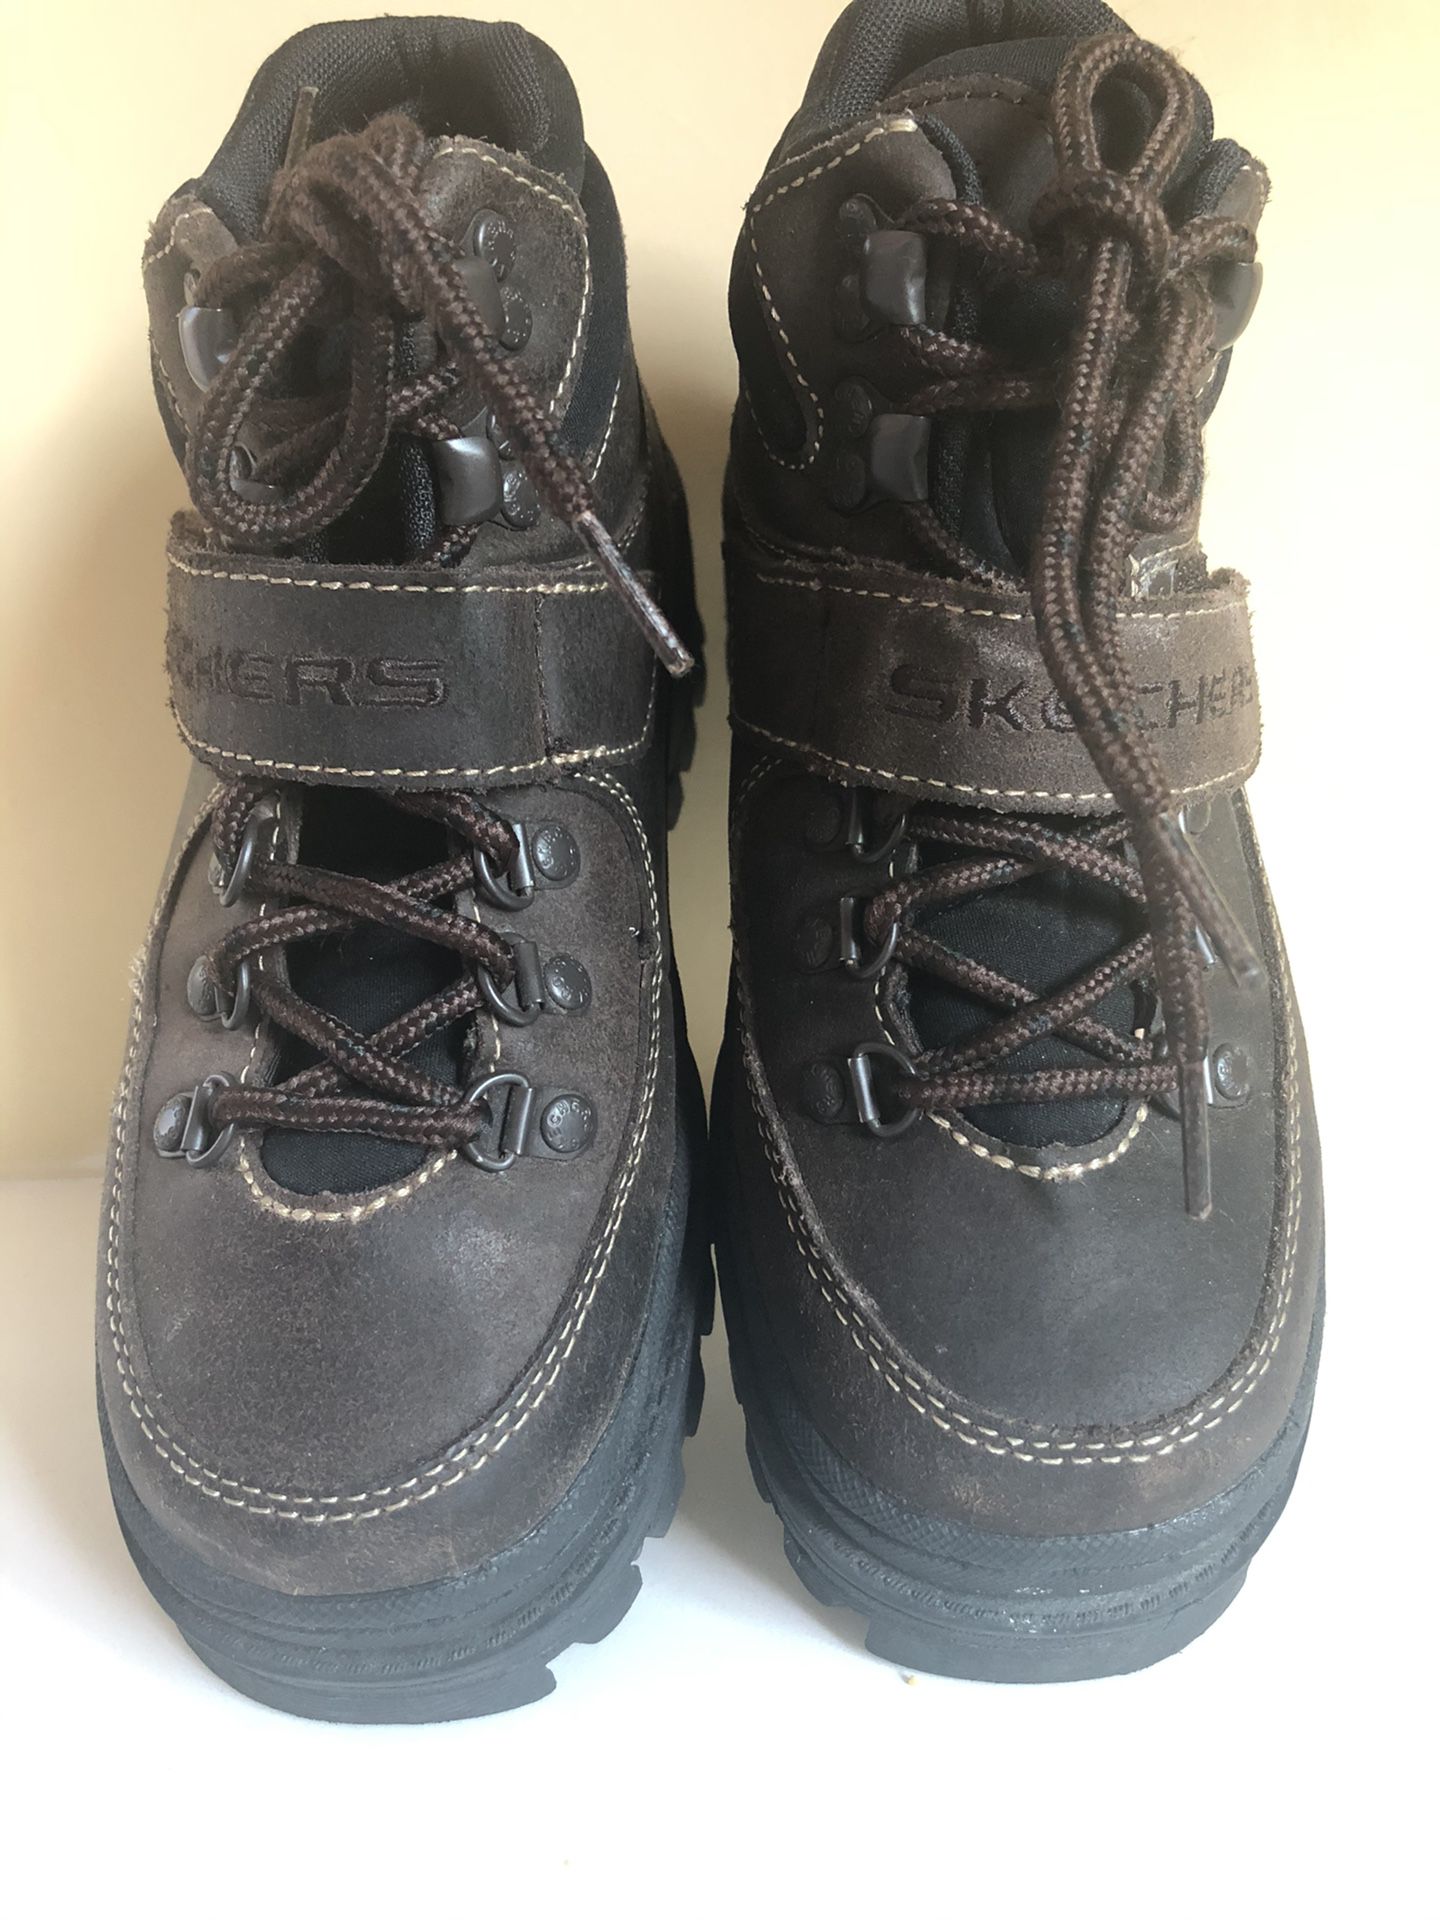 Women’s size 6 Sketchers hiking boots